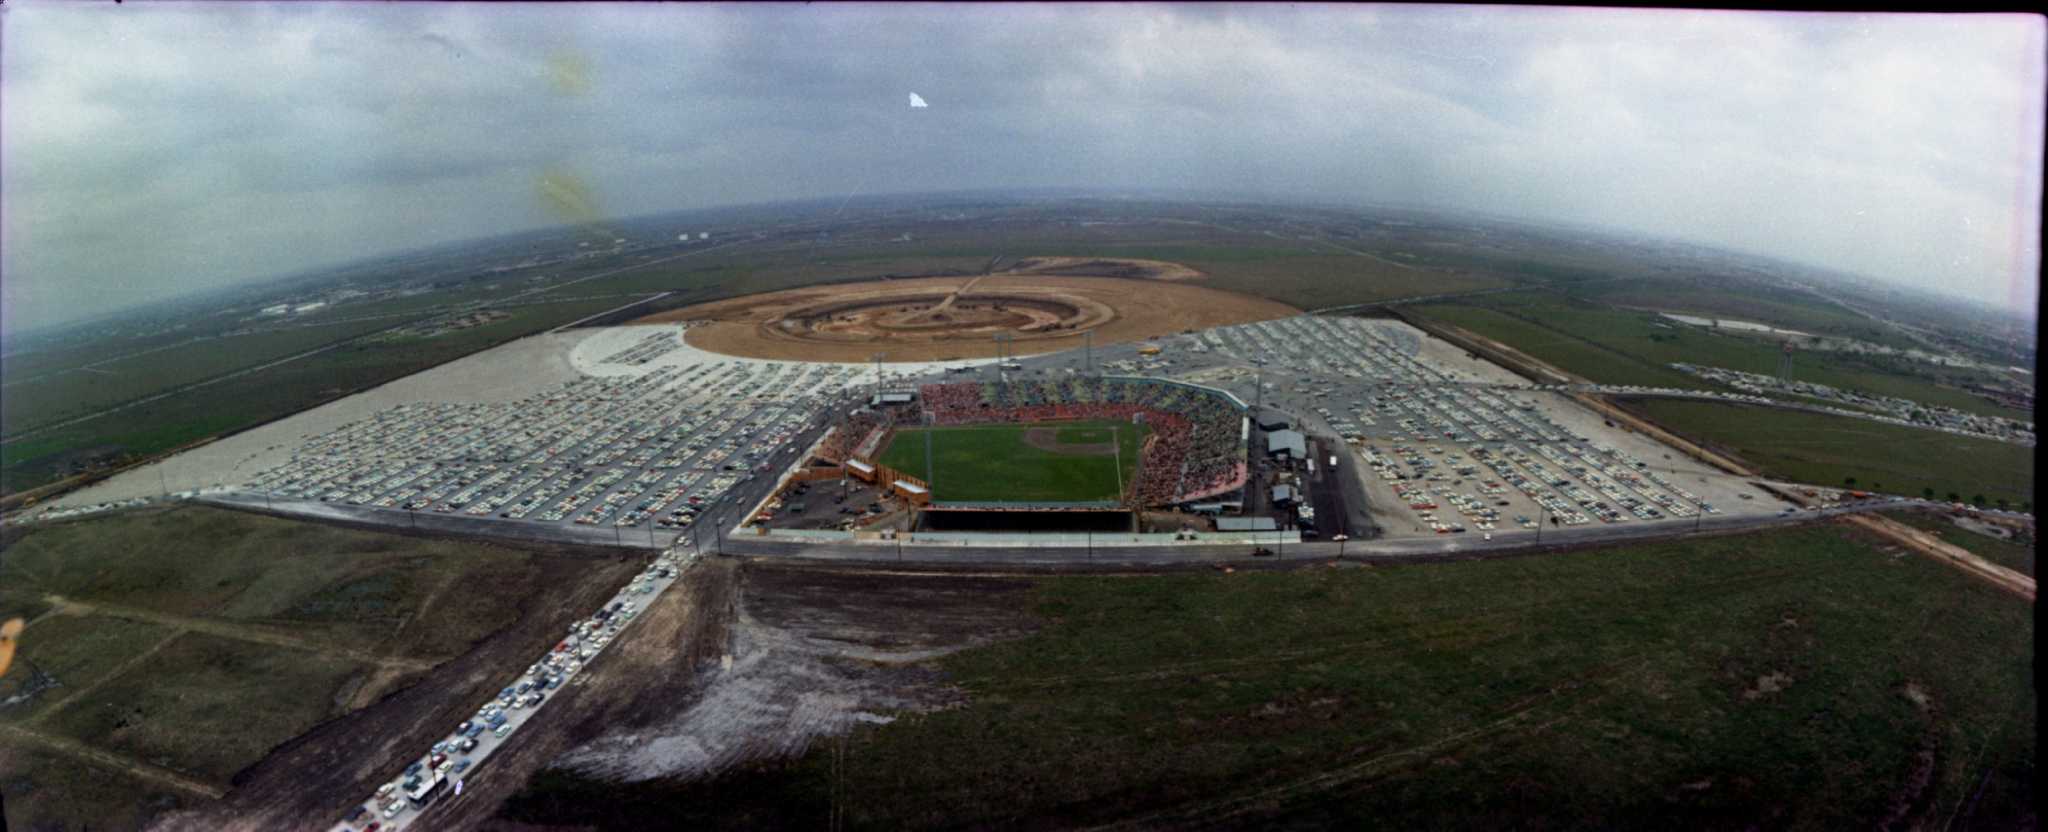 Colt Stadium - history, photos and more of the Houston Astros